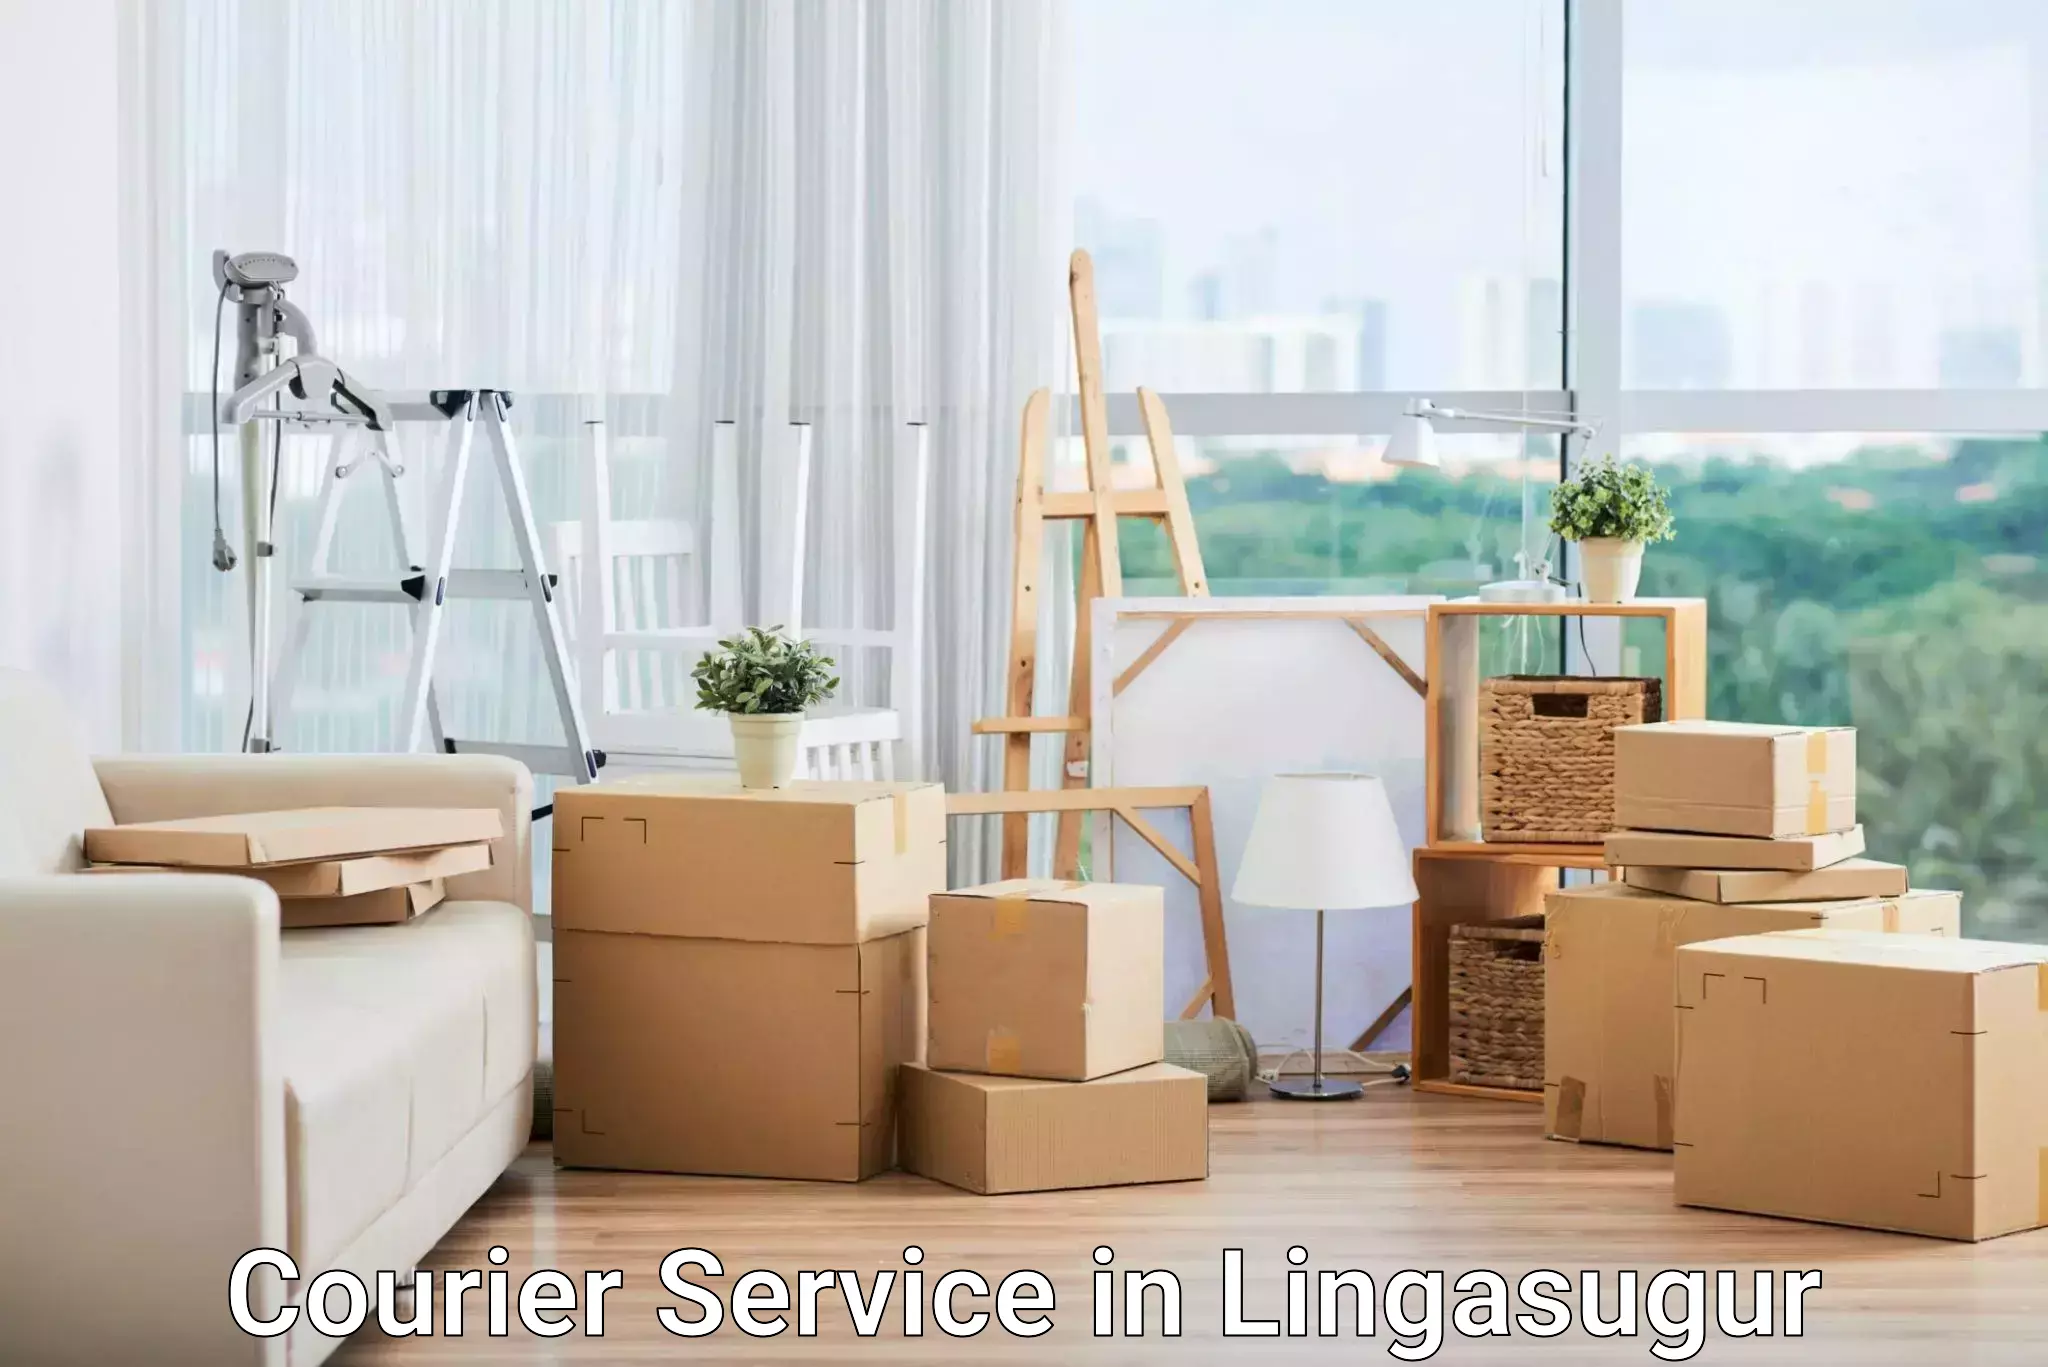 On-call courier service in Lingasugur